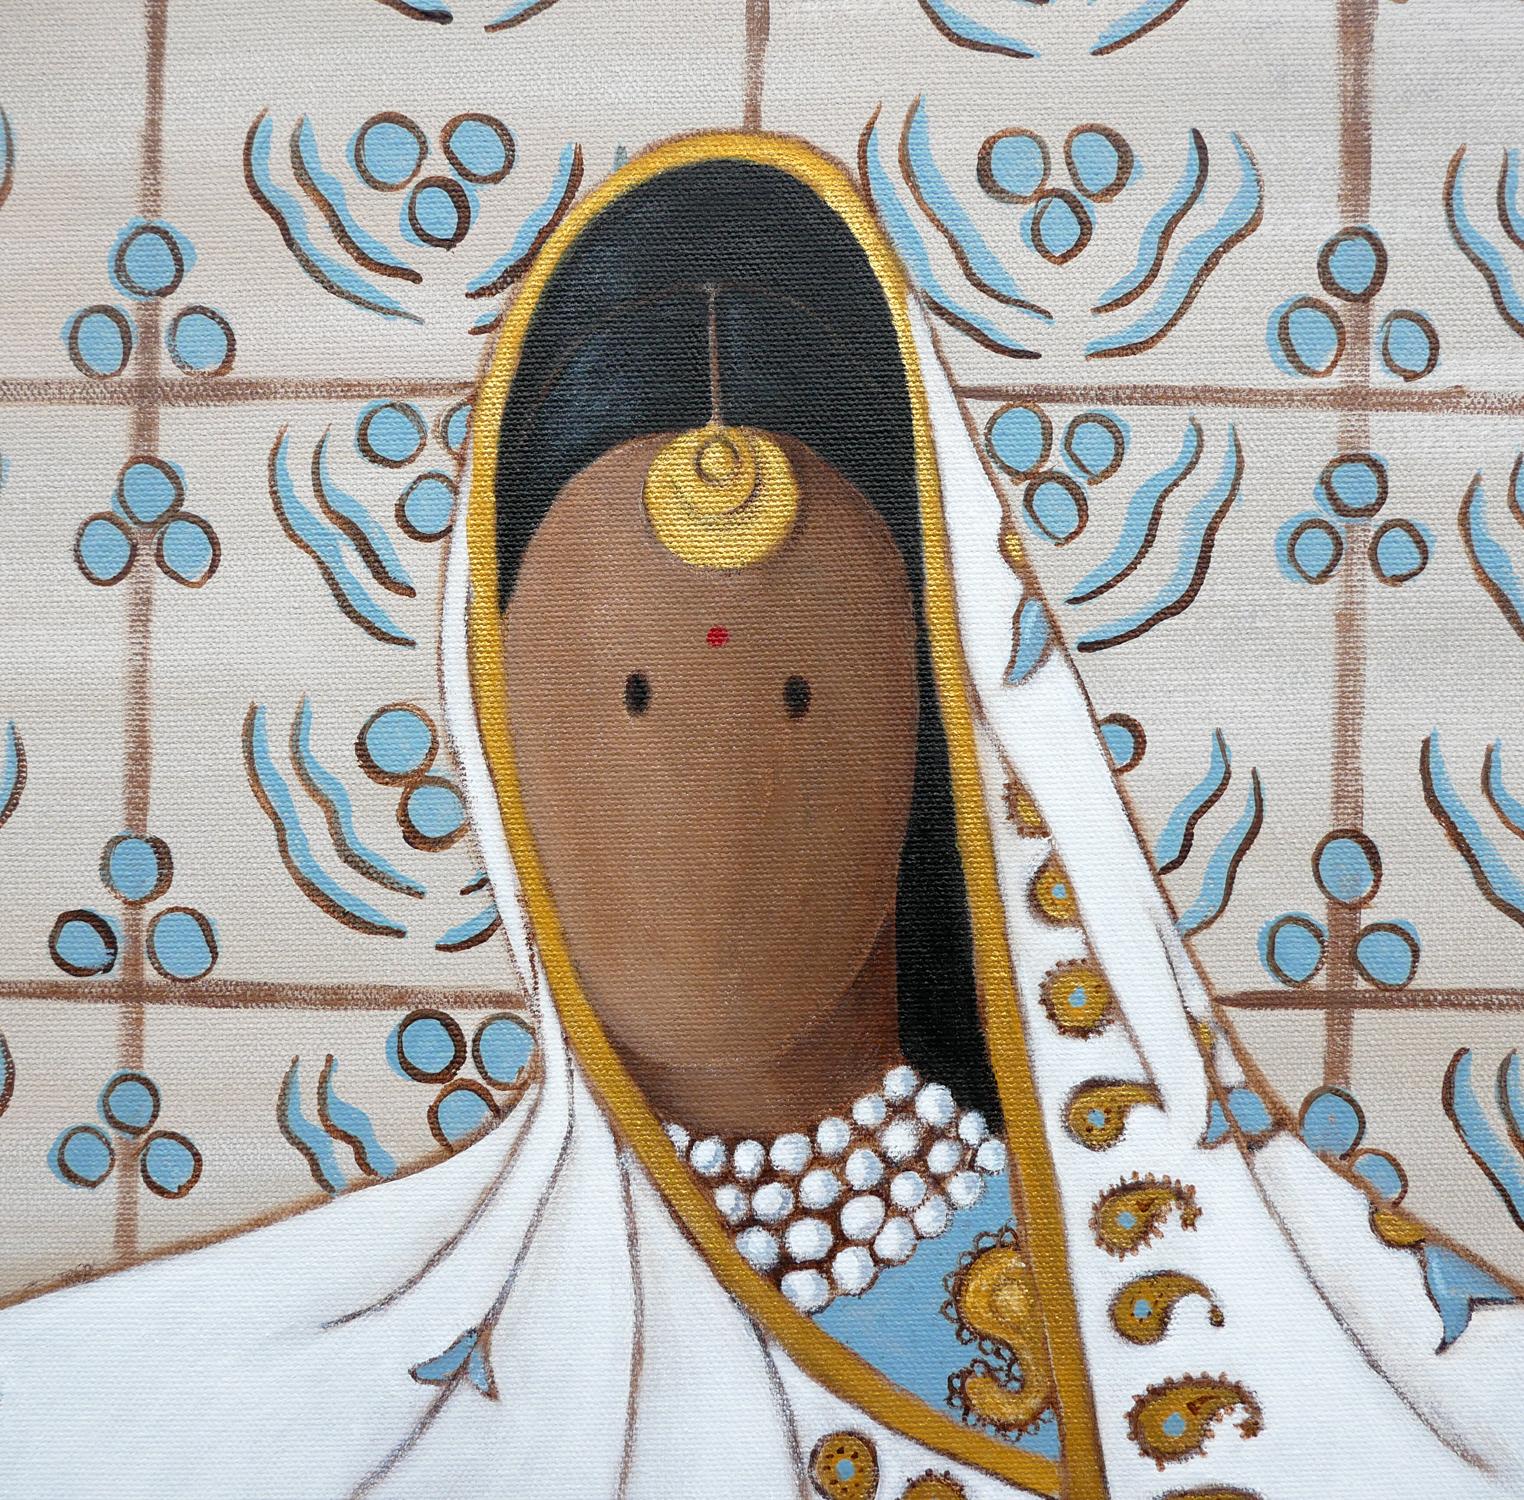 “Queen Kunti-Heroine of the Mahabharata” Light Blue & Gold Contemporary Painting For Sale 5